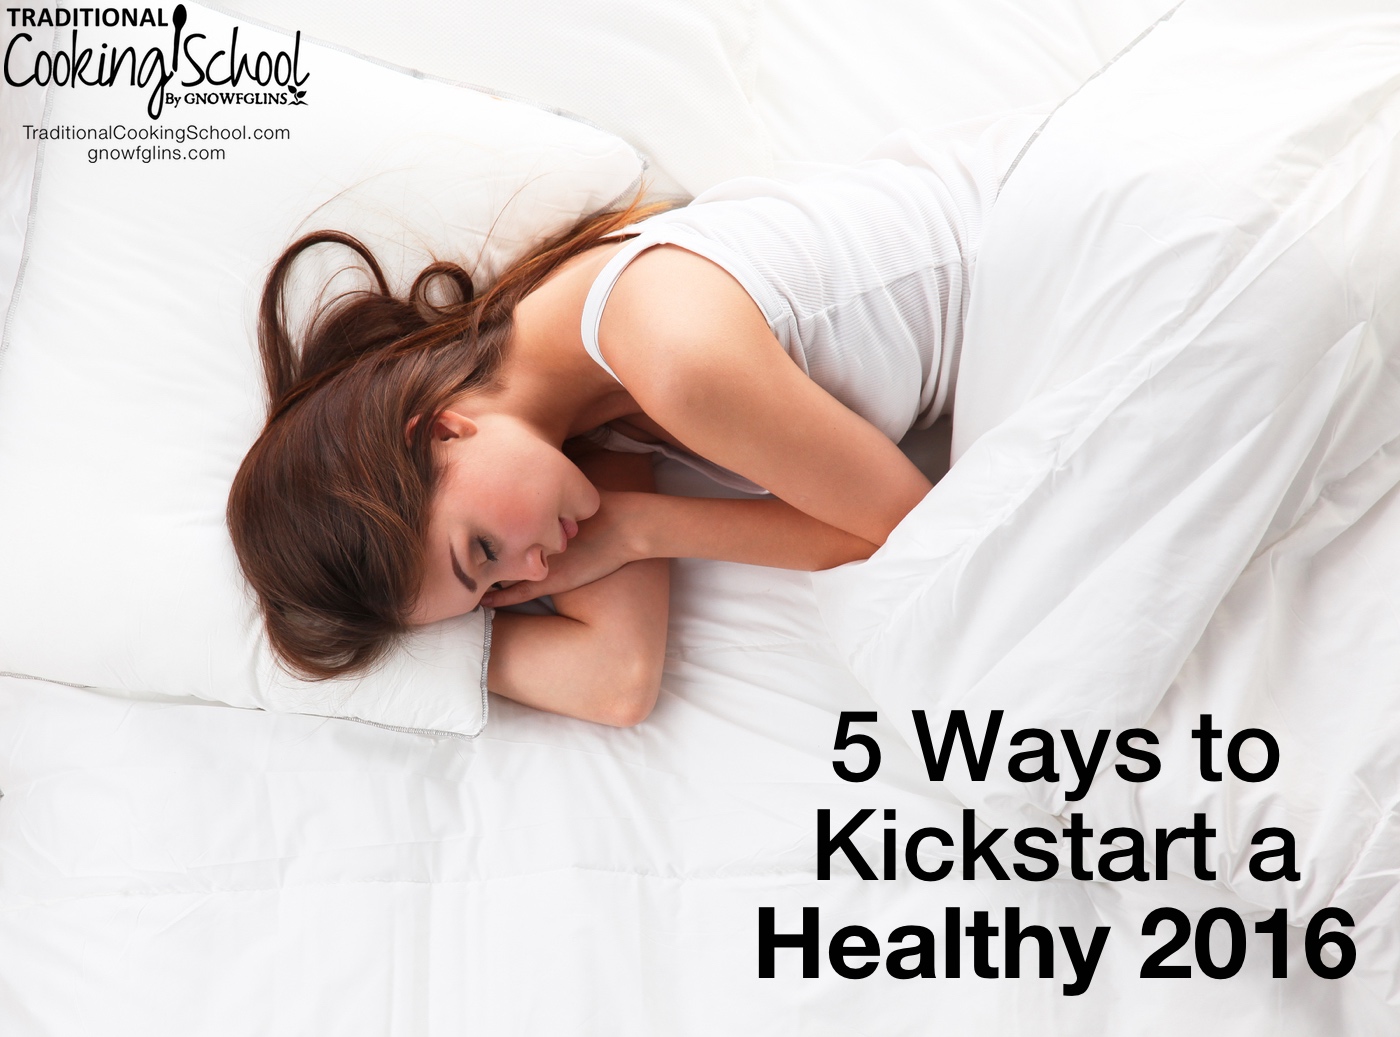 5 Ways To Kickstart A Healthy New Year | The post-holiday silence gives you lots of time to ponder on all those resolutions you've made to be a better/happier/healthier/thinner/smarter you, right? Your list of resolutions may be a mile long, but I'm hoping to show you 5 simple ways to kickstart a healthy new year. | TraditionalCookingSchool.com